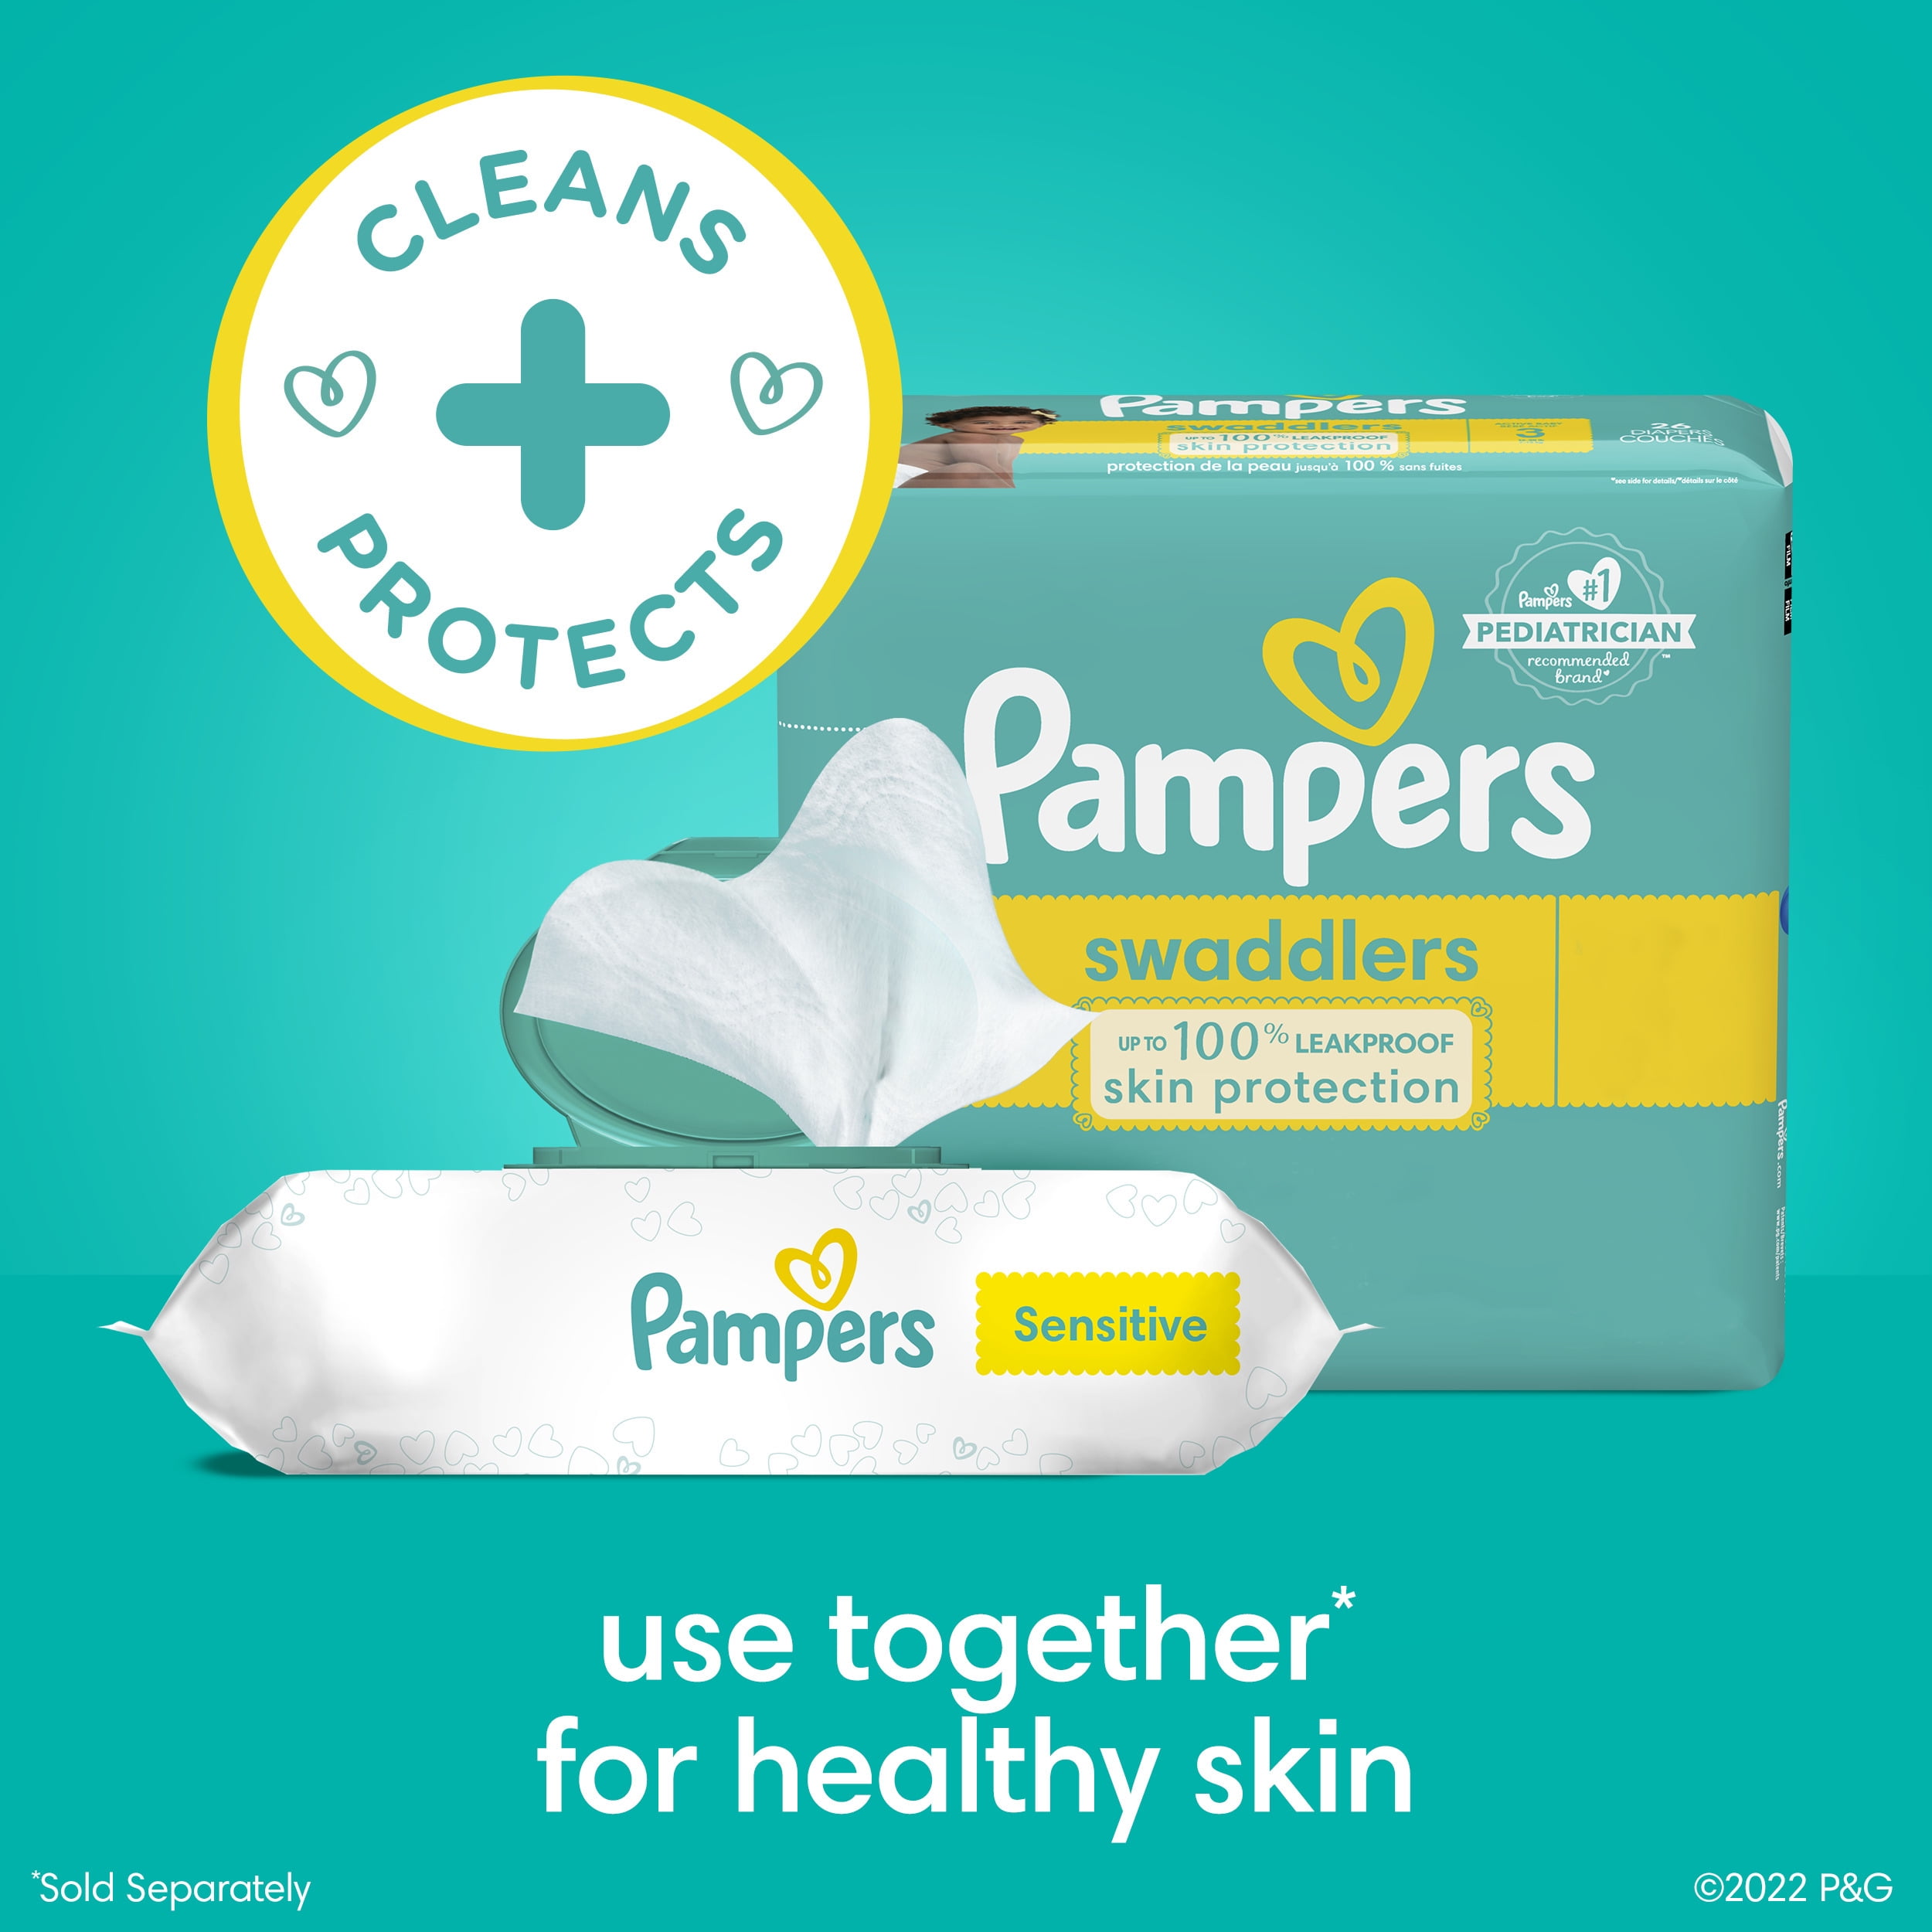 PAMPERS - Premium Protection Couches Pampers taille 6 (13kg+) - 72 couches  3343857886241